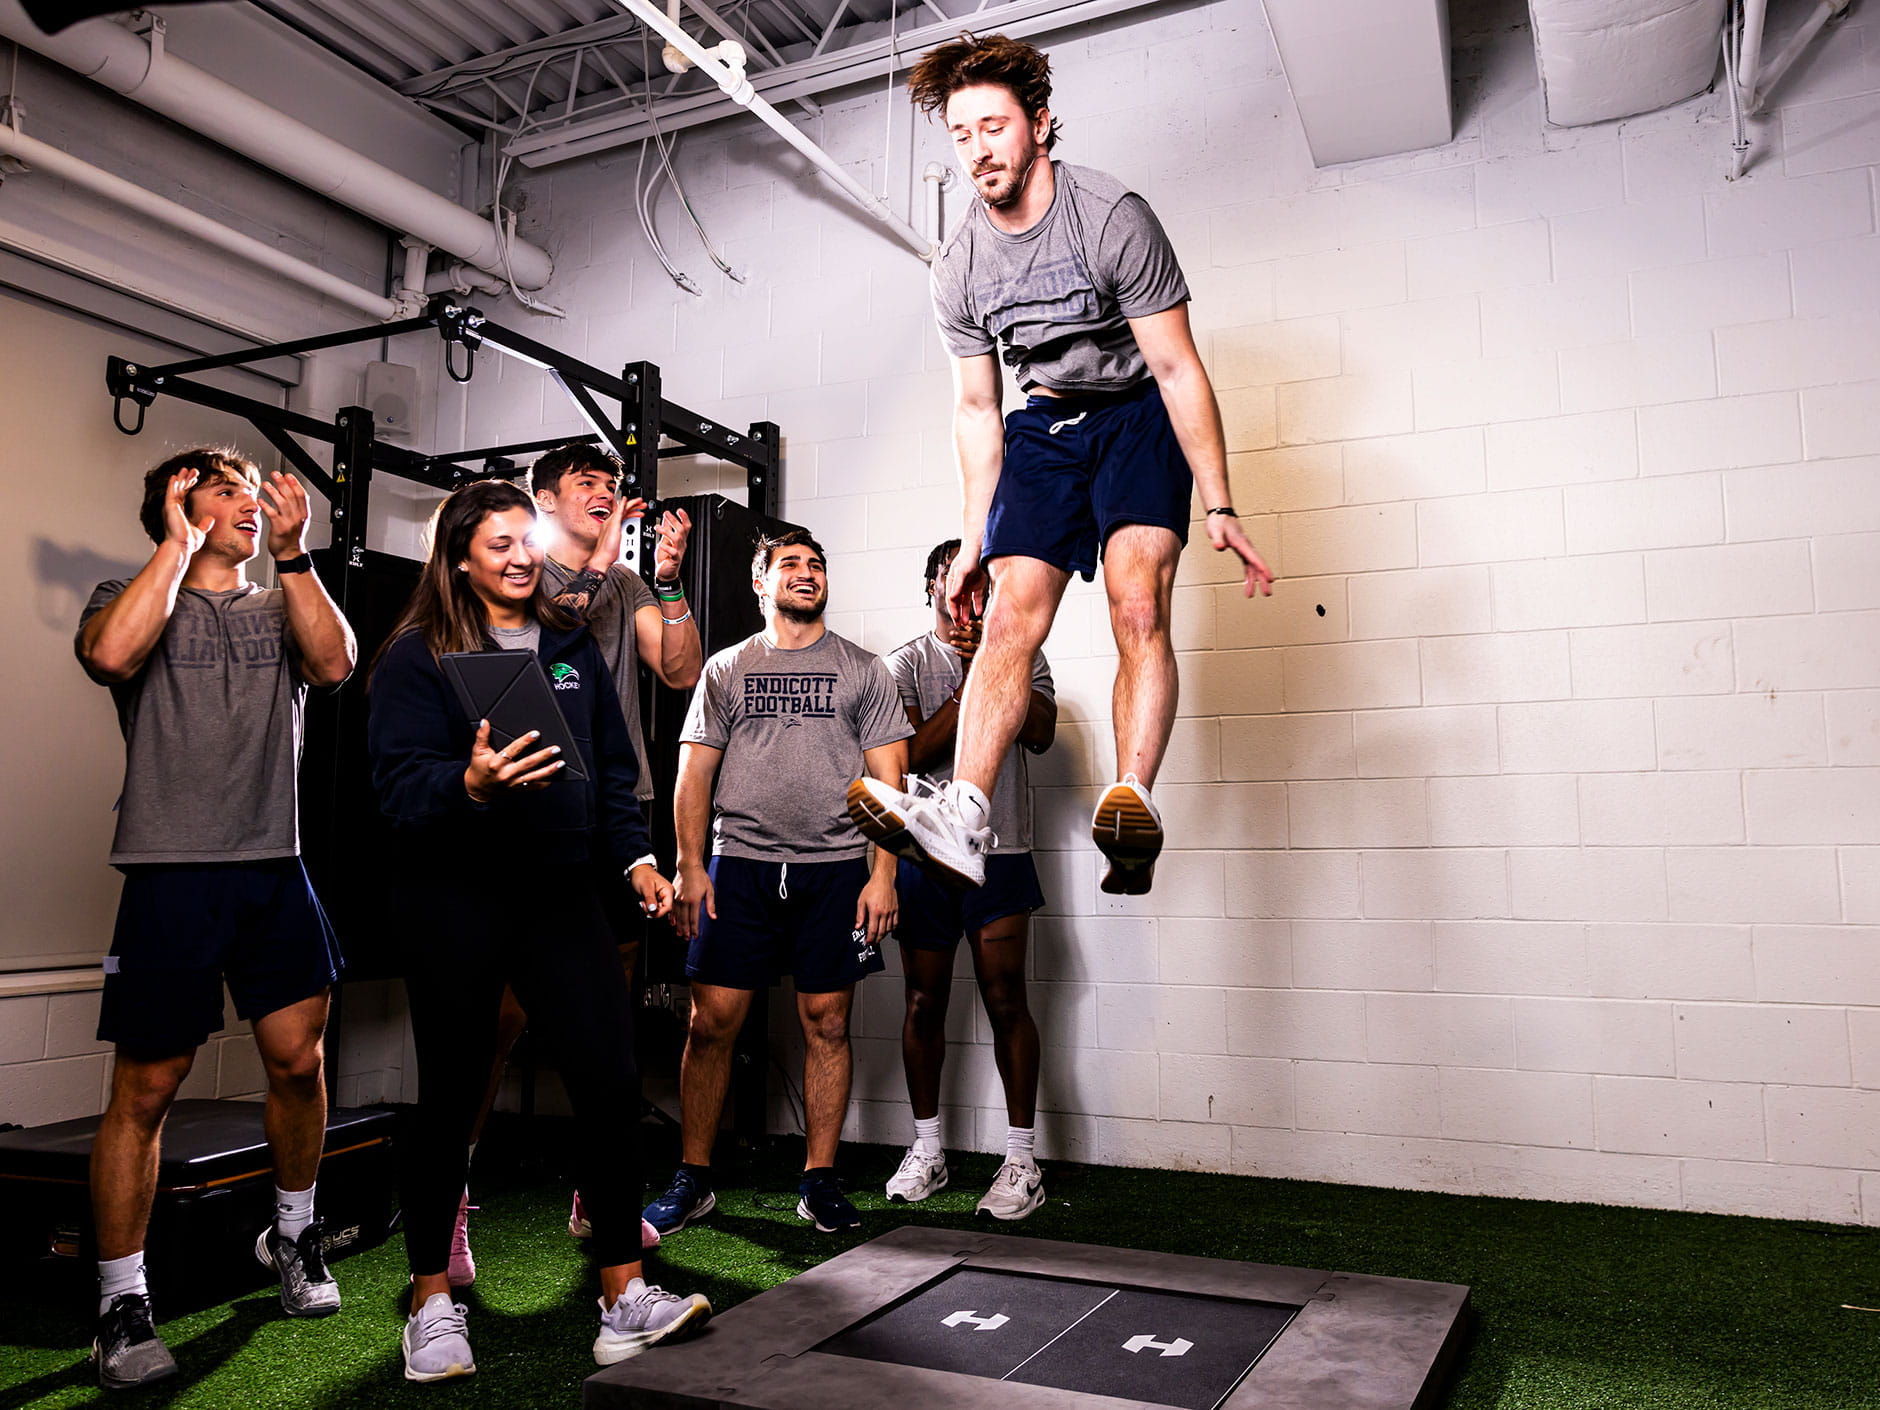 Endicott College’s use of the collaborative high-performance training model for the Gulls is a standout in DIII athletics, supporting student-athletes to optimize their game and learn healthy skills for life.